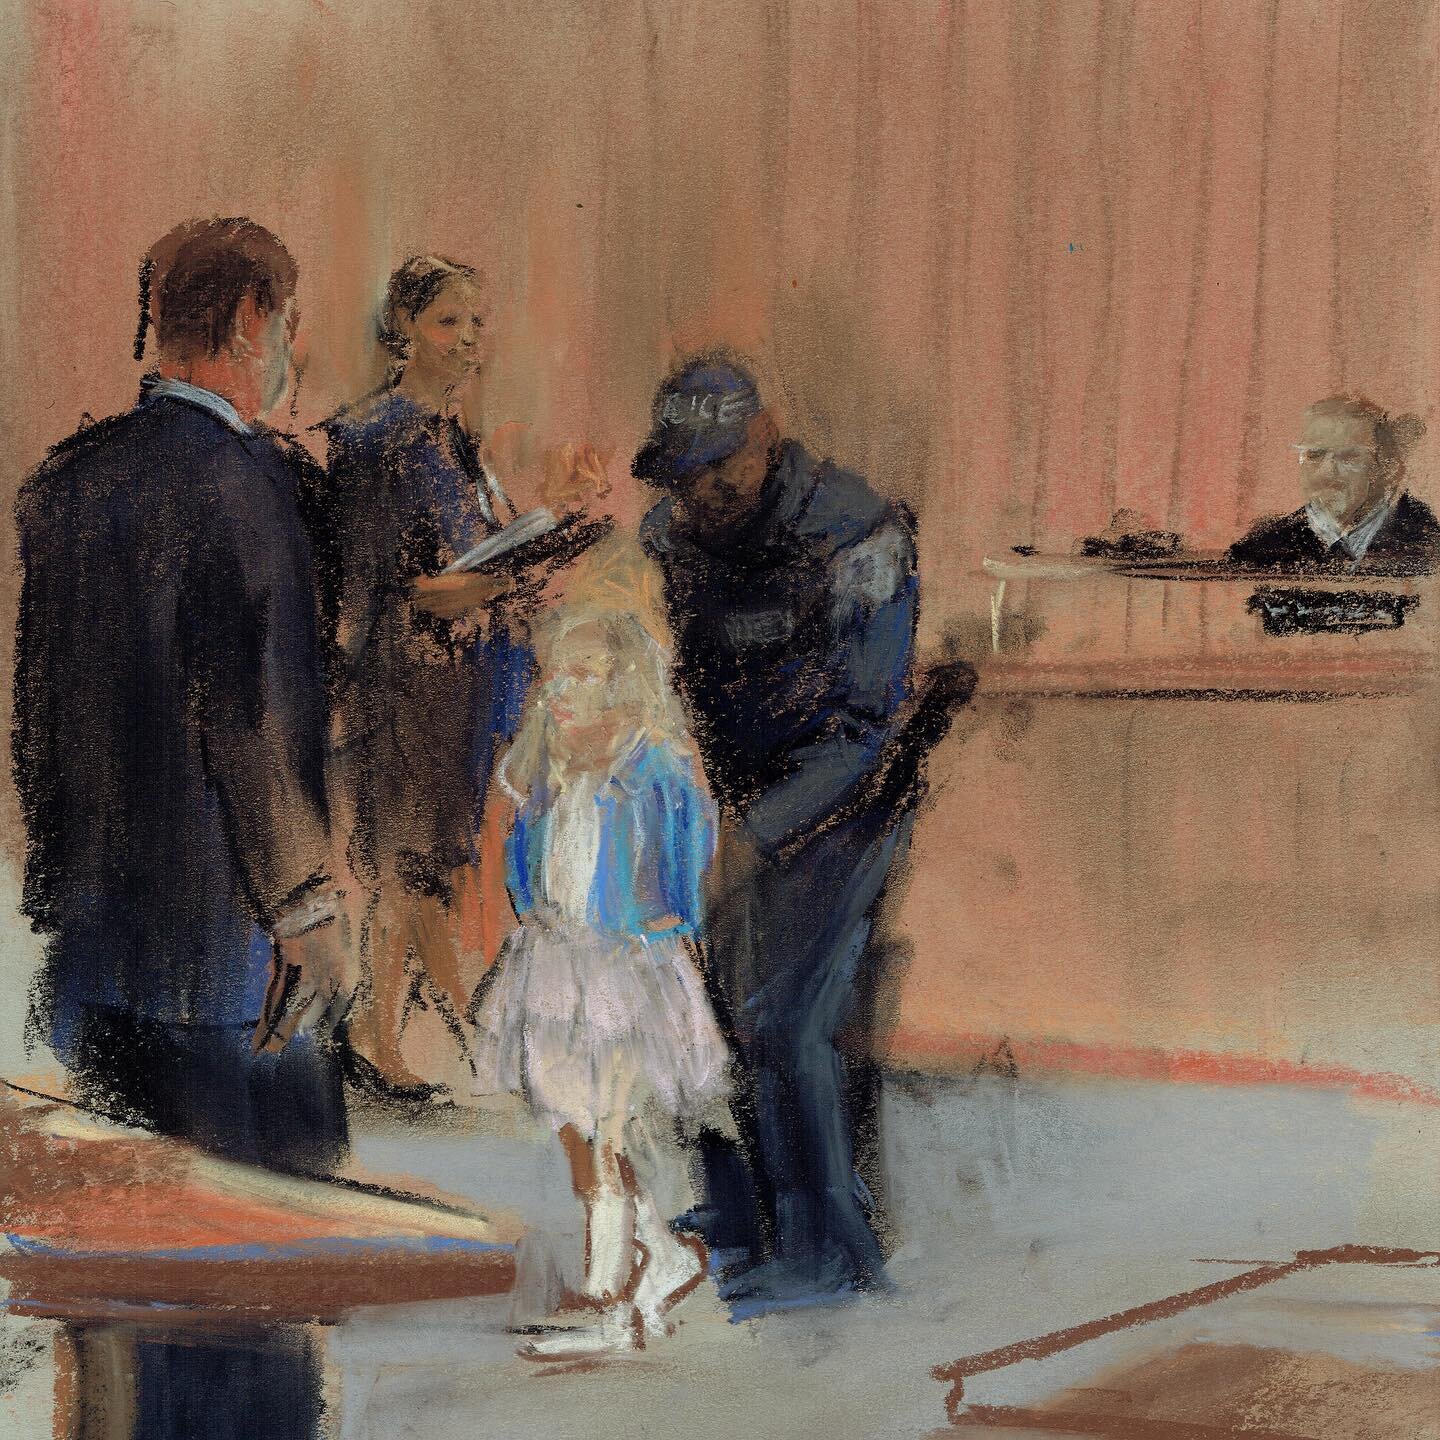 Courtroom sketch if an old elementary school foe saw justice. #illustration #art #pastel